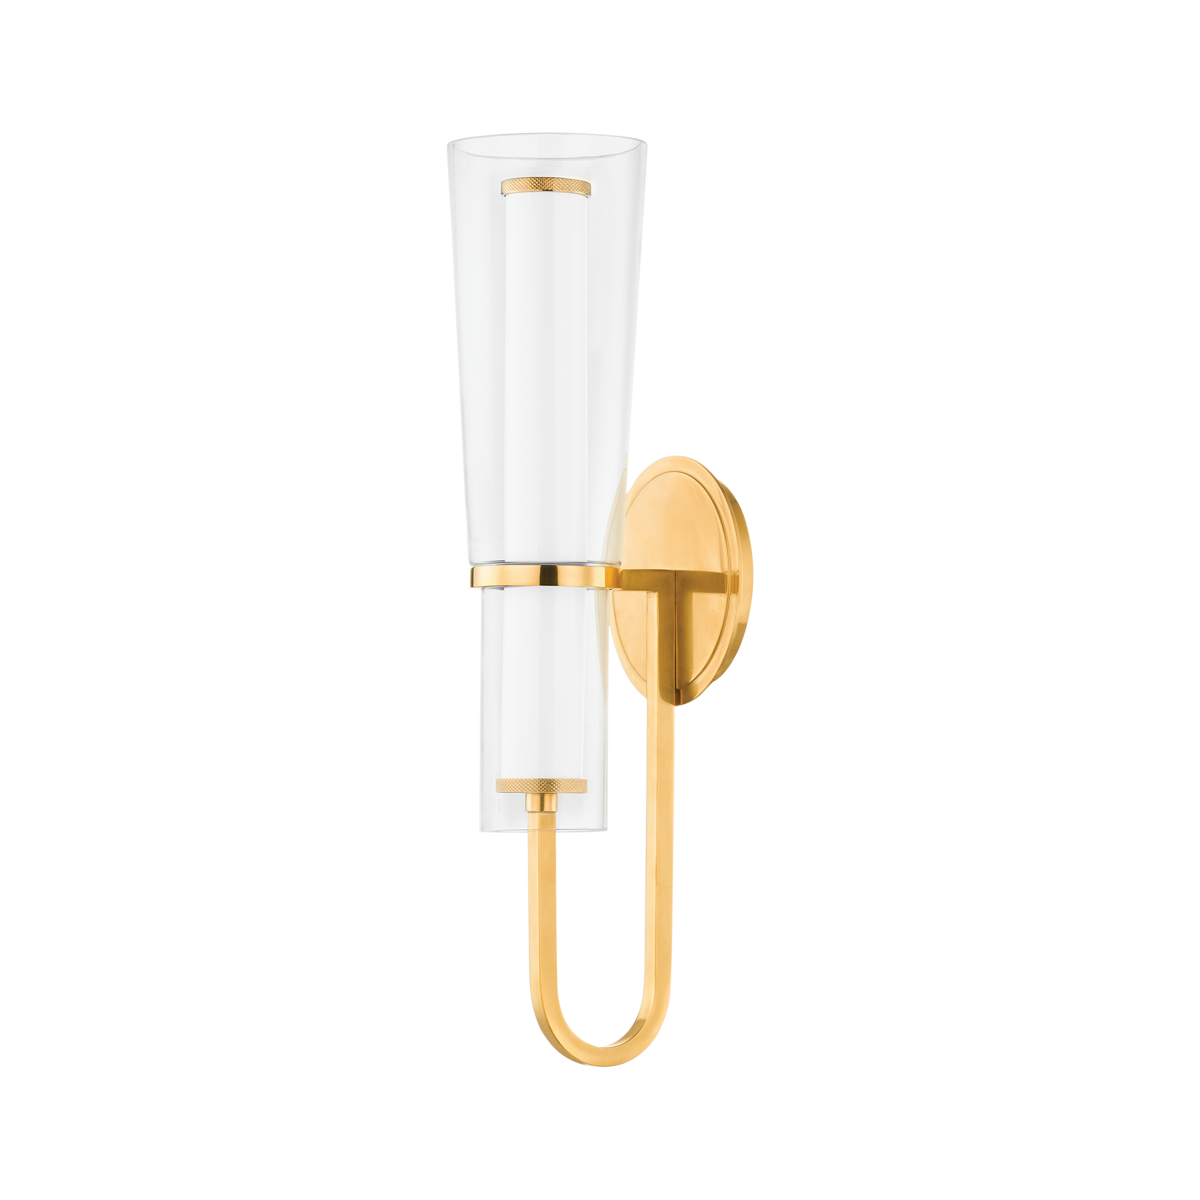 Hudson Valley Lighting VANCOUVER Wall Sconce Sconce Hudson Valley Lighting Aged Brass  